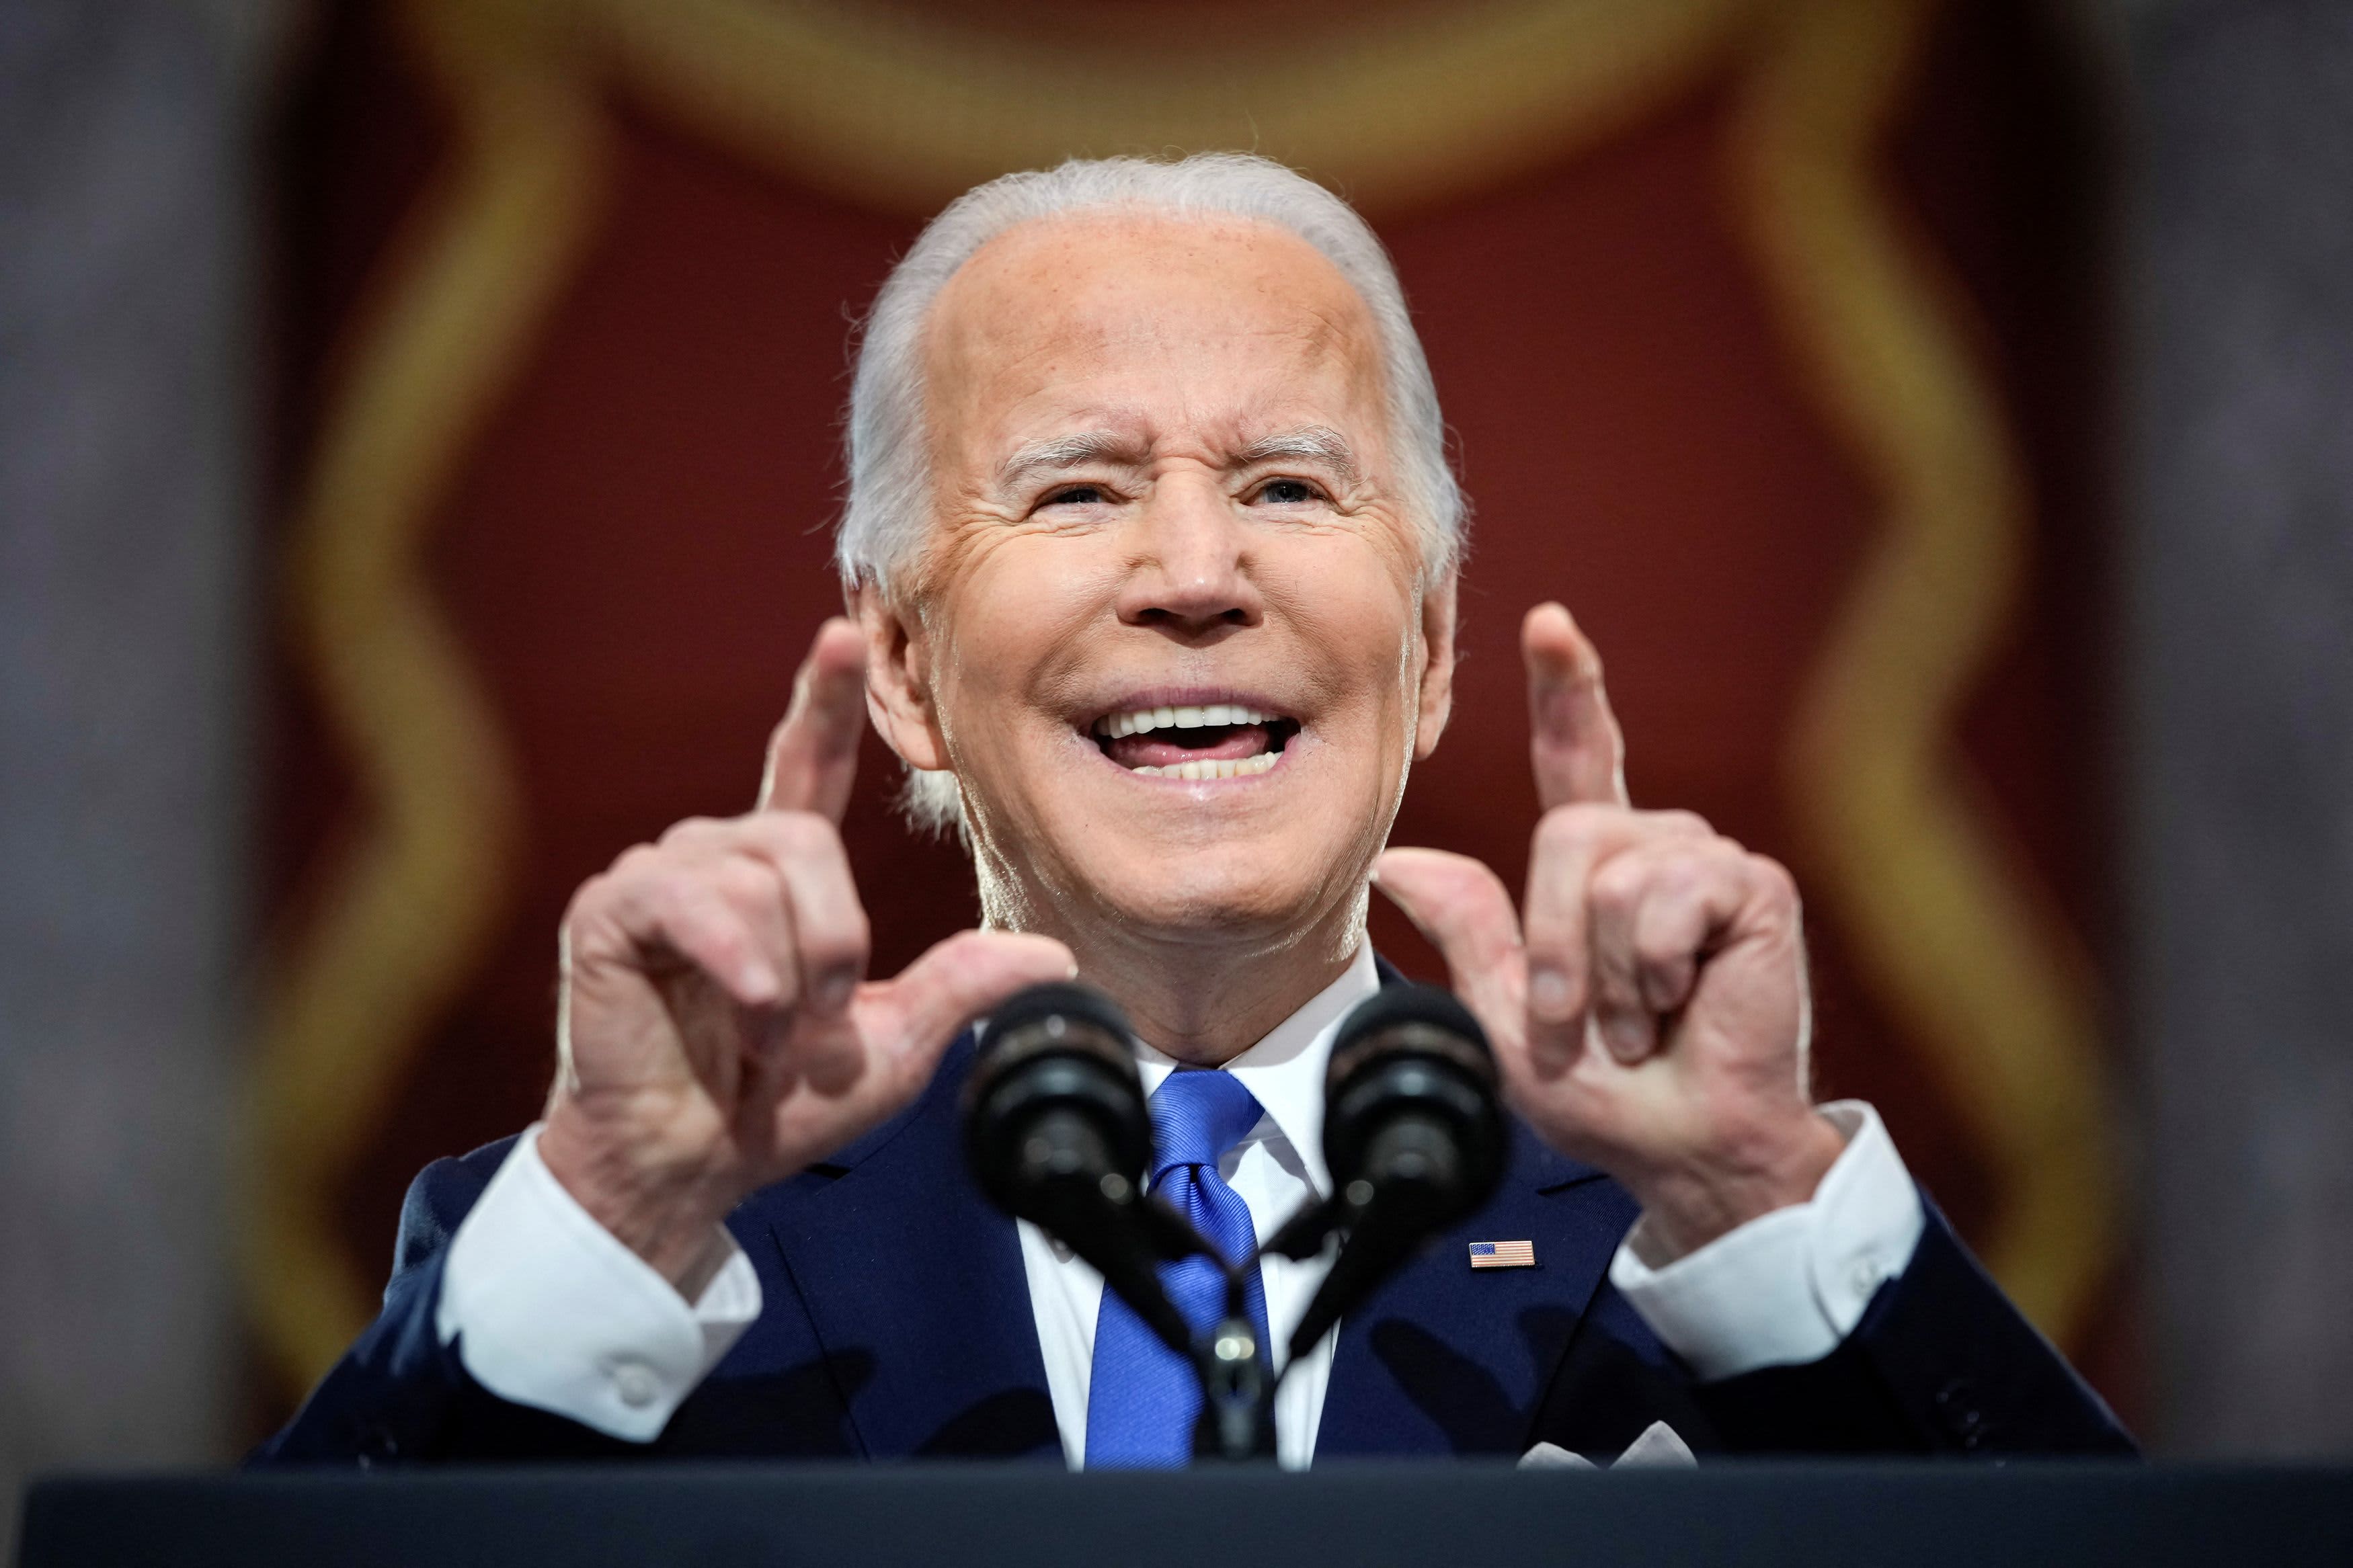 Picture - Messy job reports and unreliable labor data forecasts take a toll on Biden in his first year